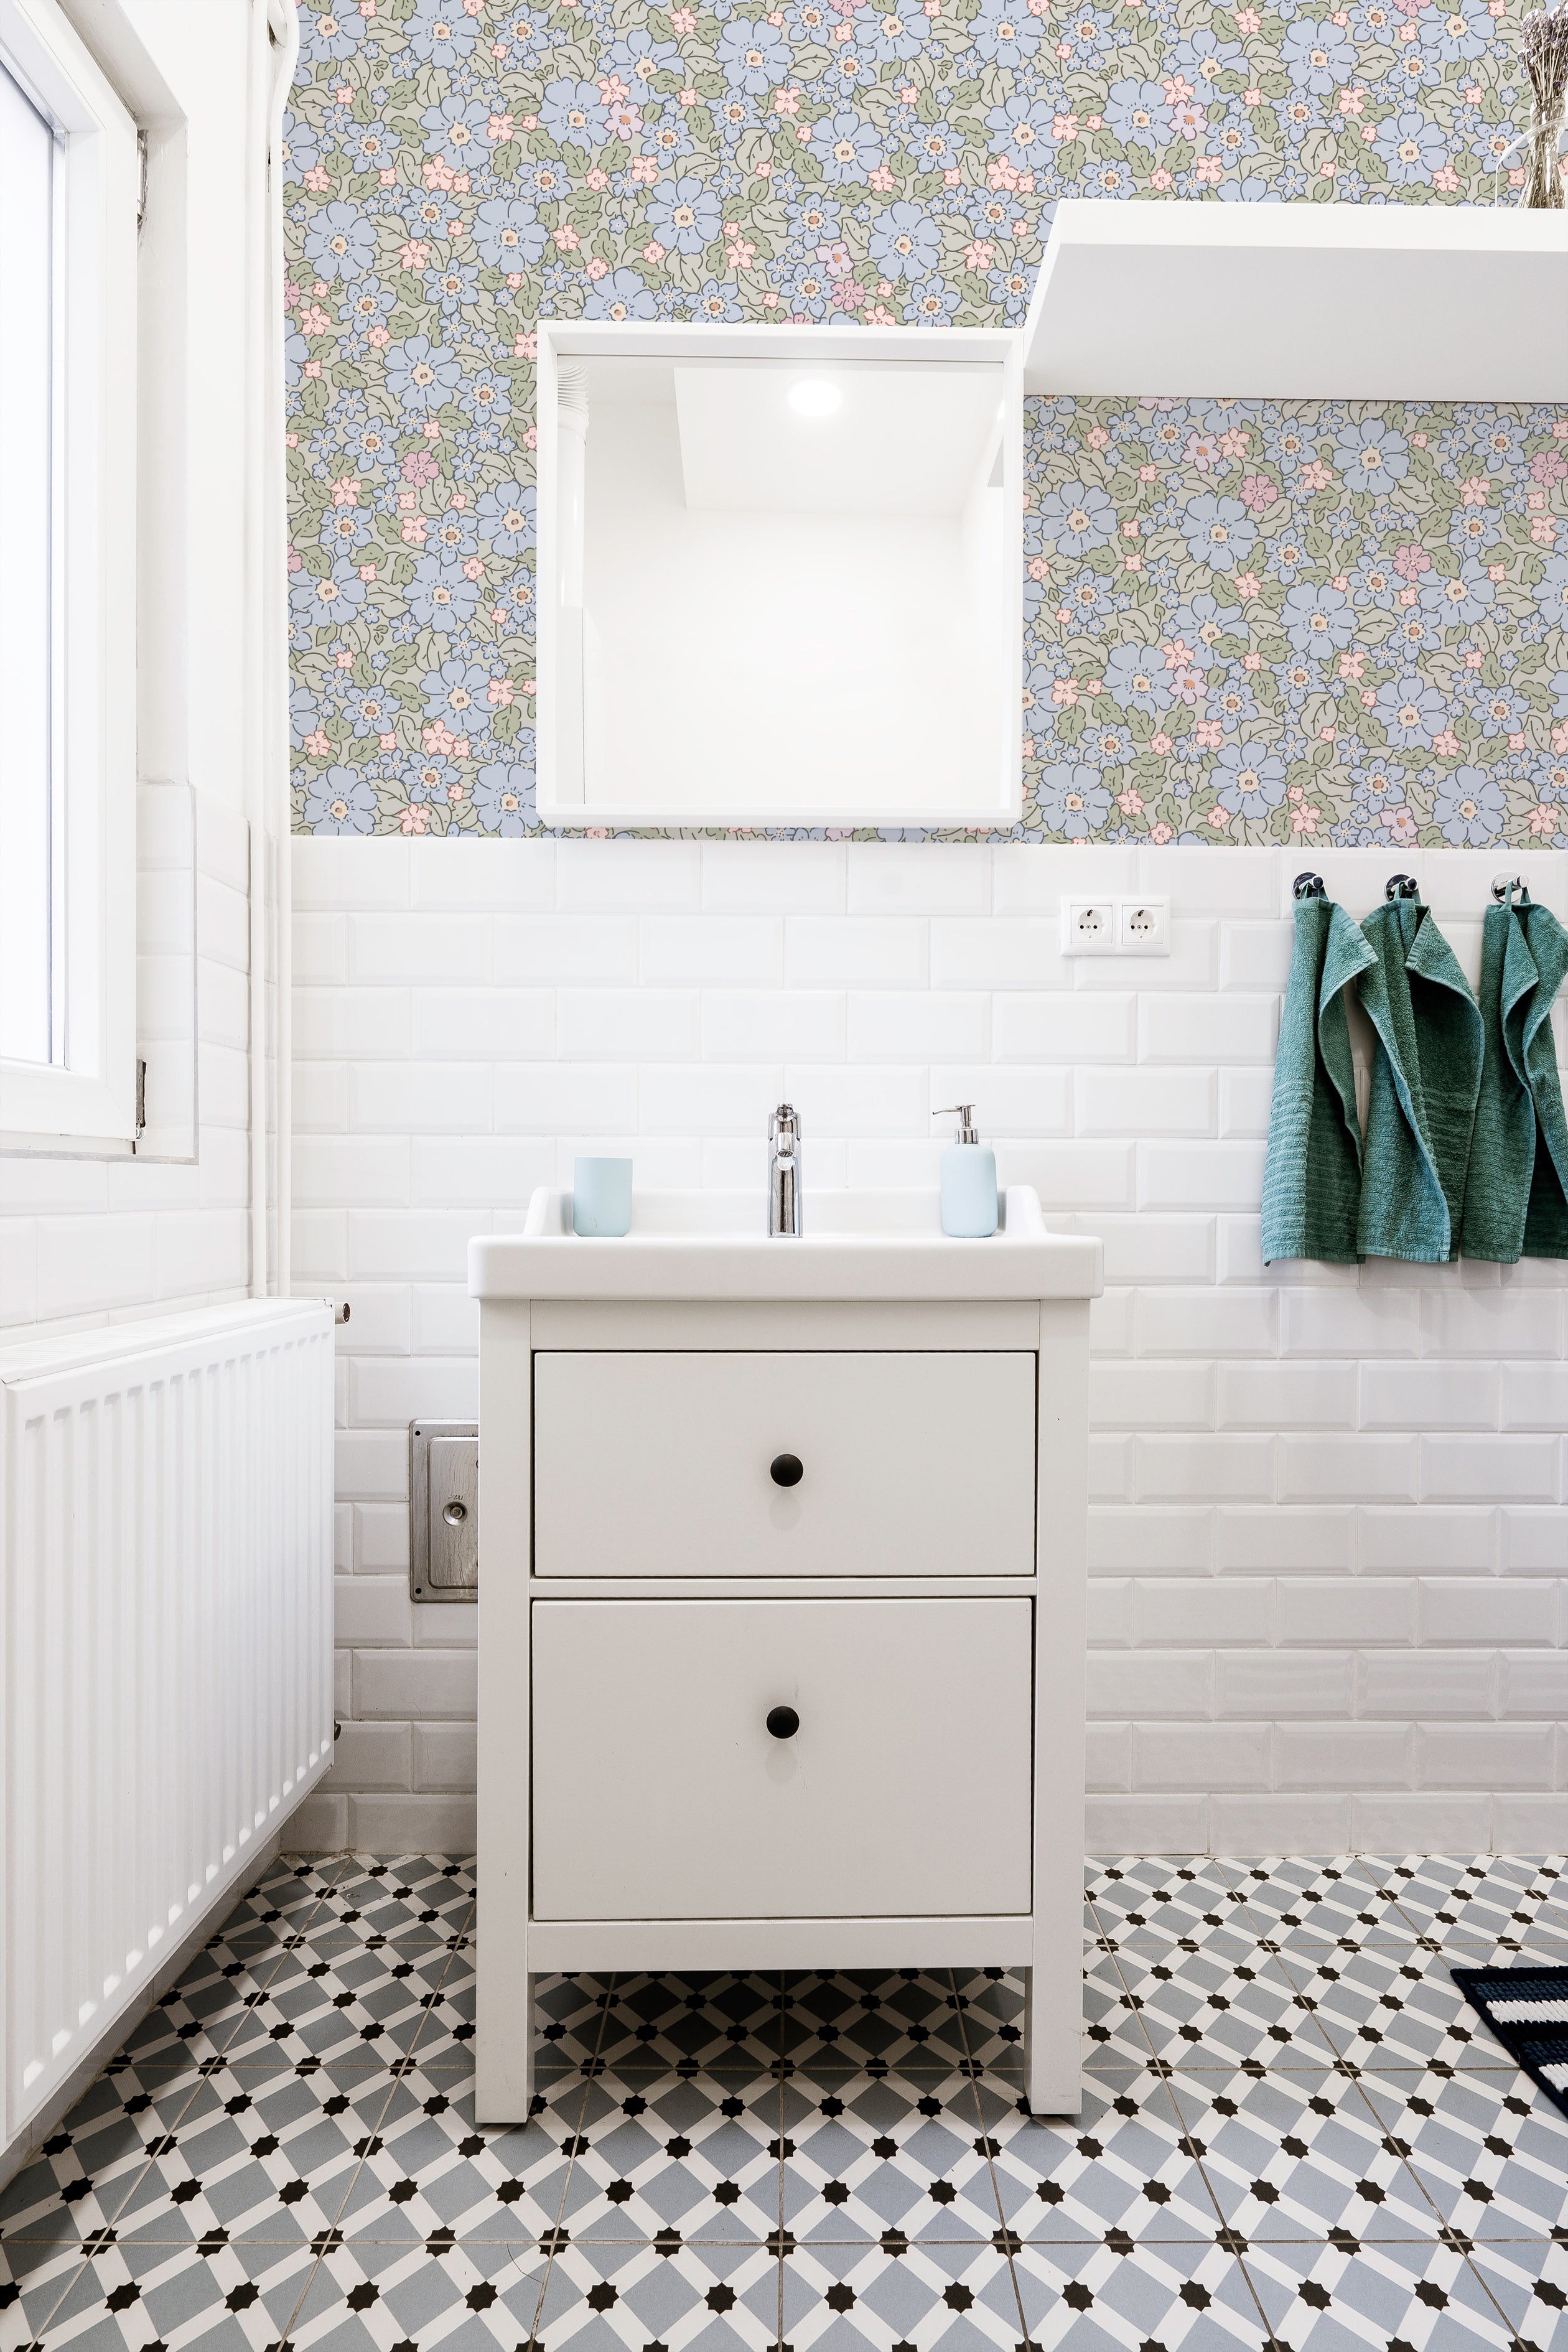 A vibrant bathroom decor showcasing Joie Wallpaper with a pattern of intricate multicolored flowers on a light green background. The setting includes a white sink cabinet with a top-mounted basin, complemented by white subway tiles and a black-and-white checkered floor, creating a bright and cheerful atmosphere.